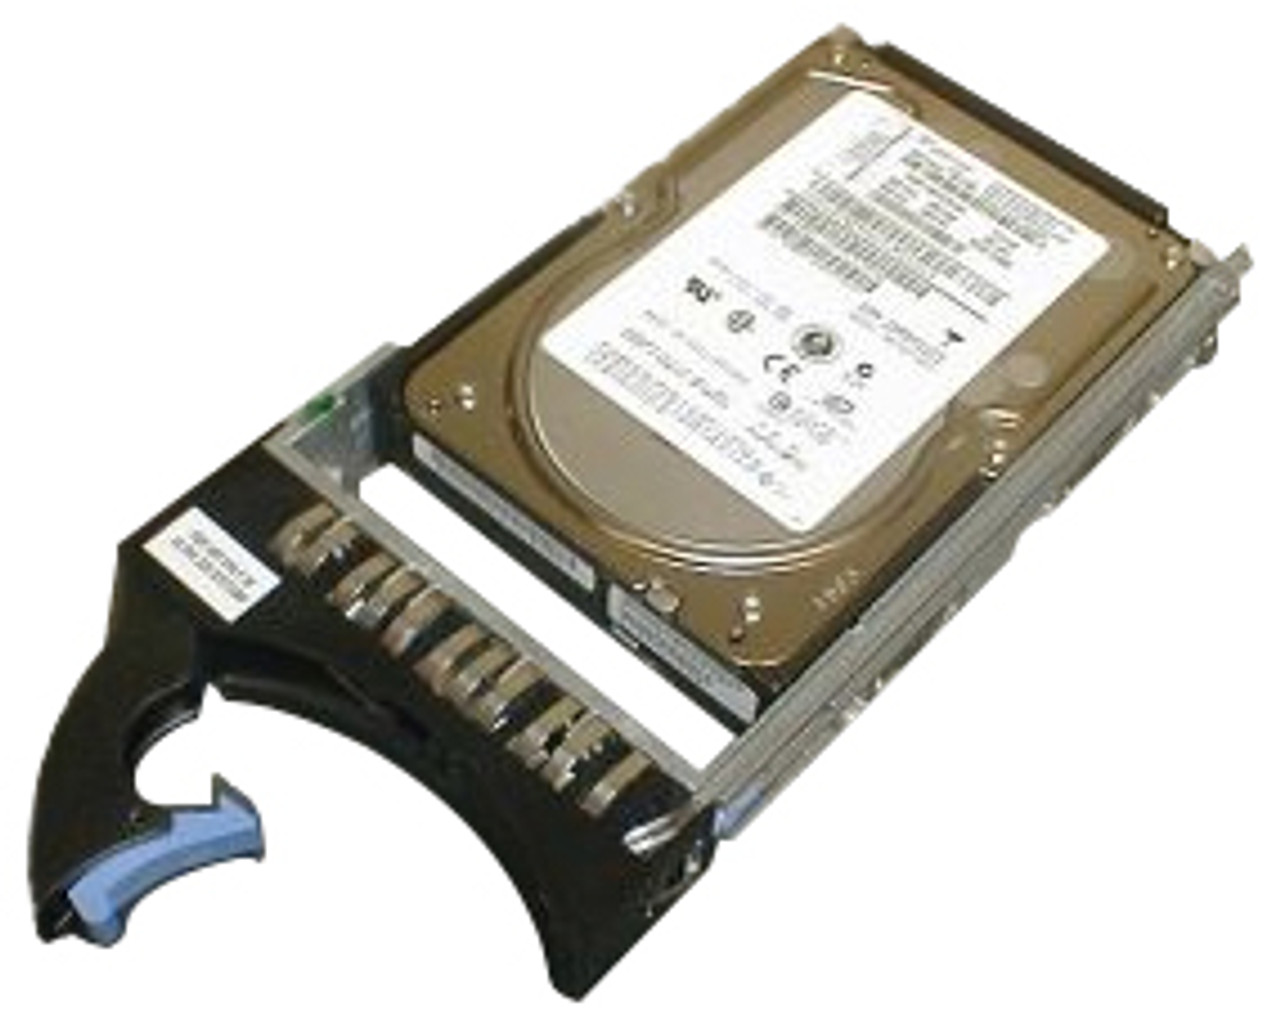 00Y5148 - IBM 4TB 7200RPM 3.5-inch 6GB/s NL SAS Hot Swapable Hard Drive with Tray for IBM System Storage DS3500